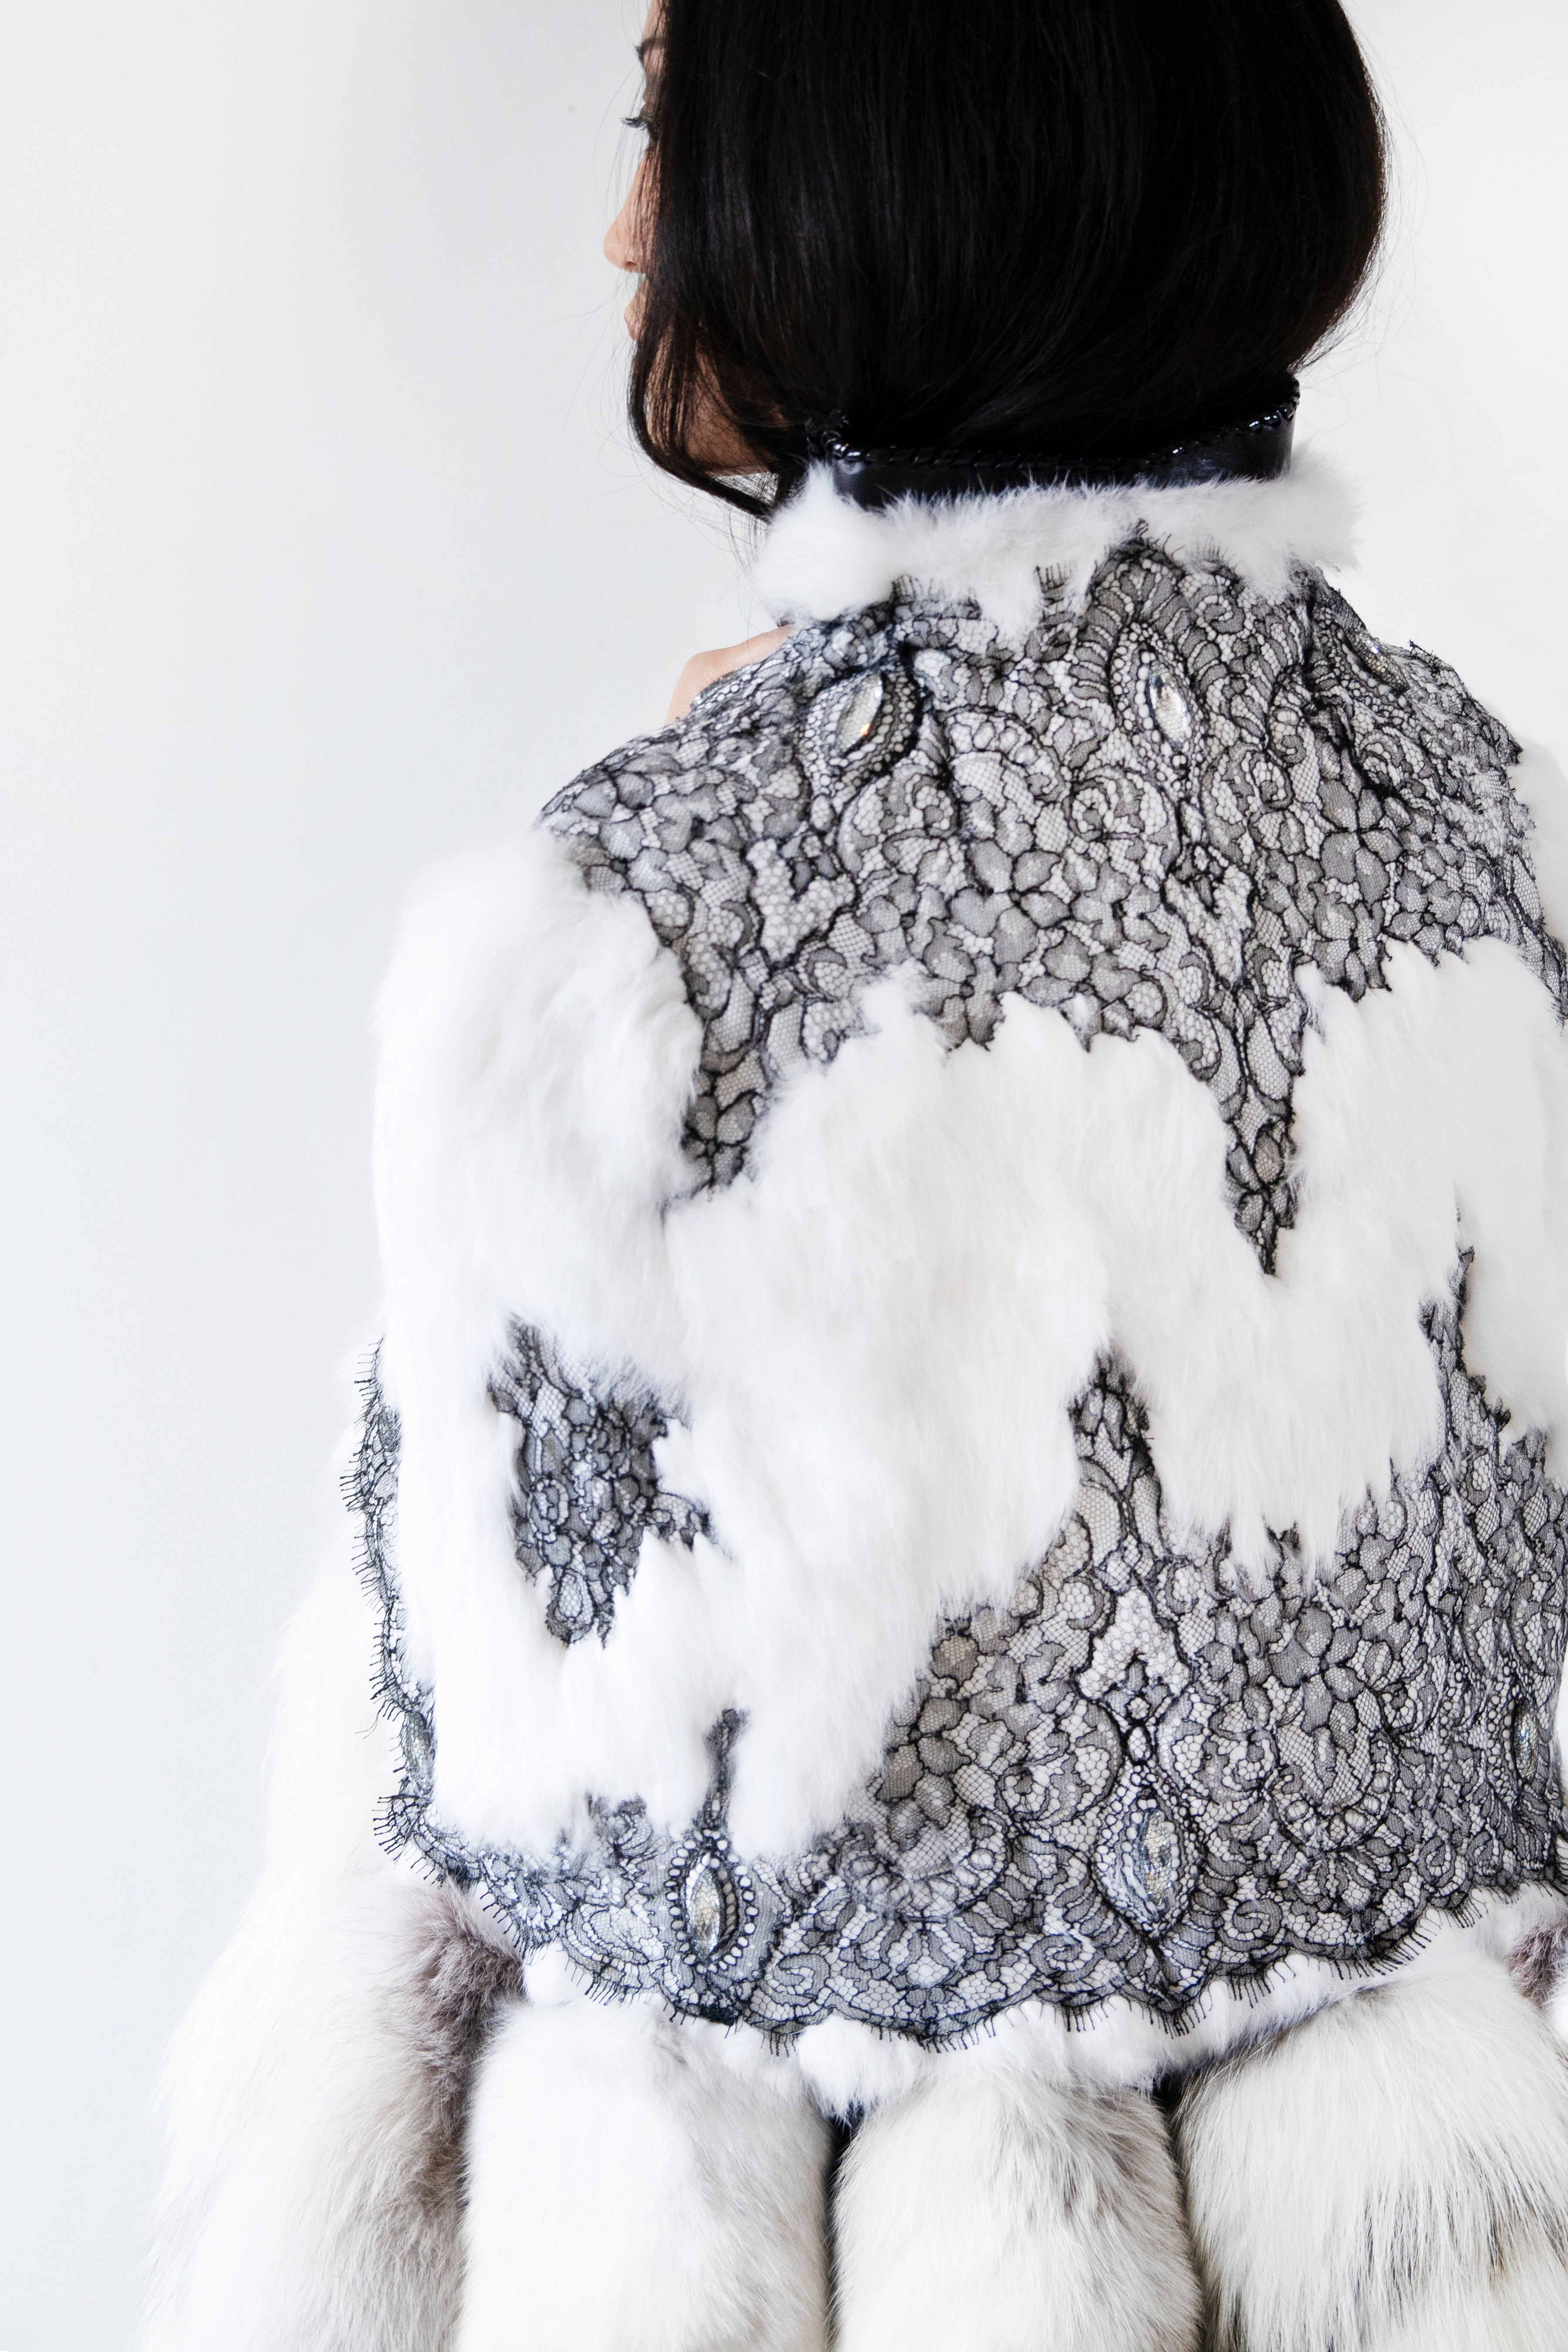 White winter evening with French lace - KxLNewYork